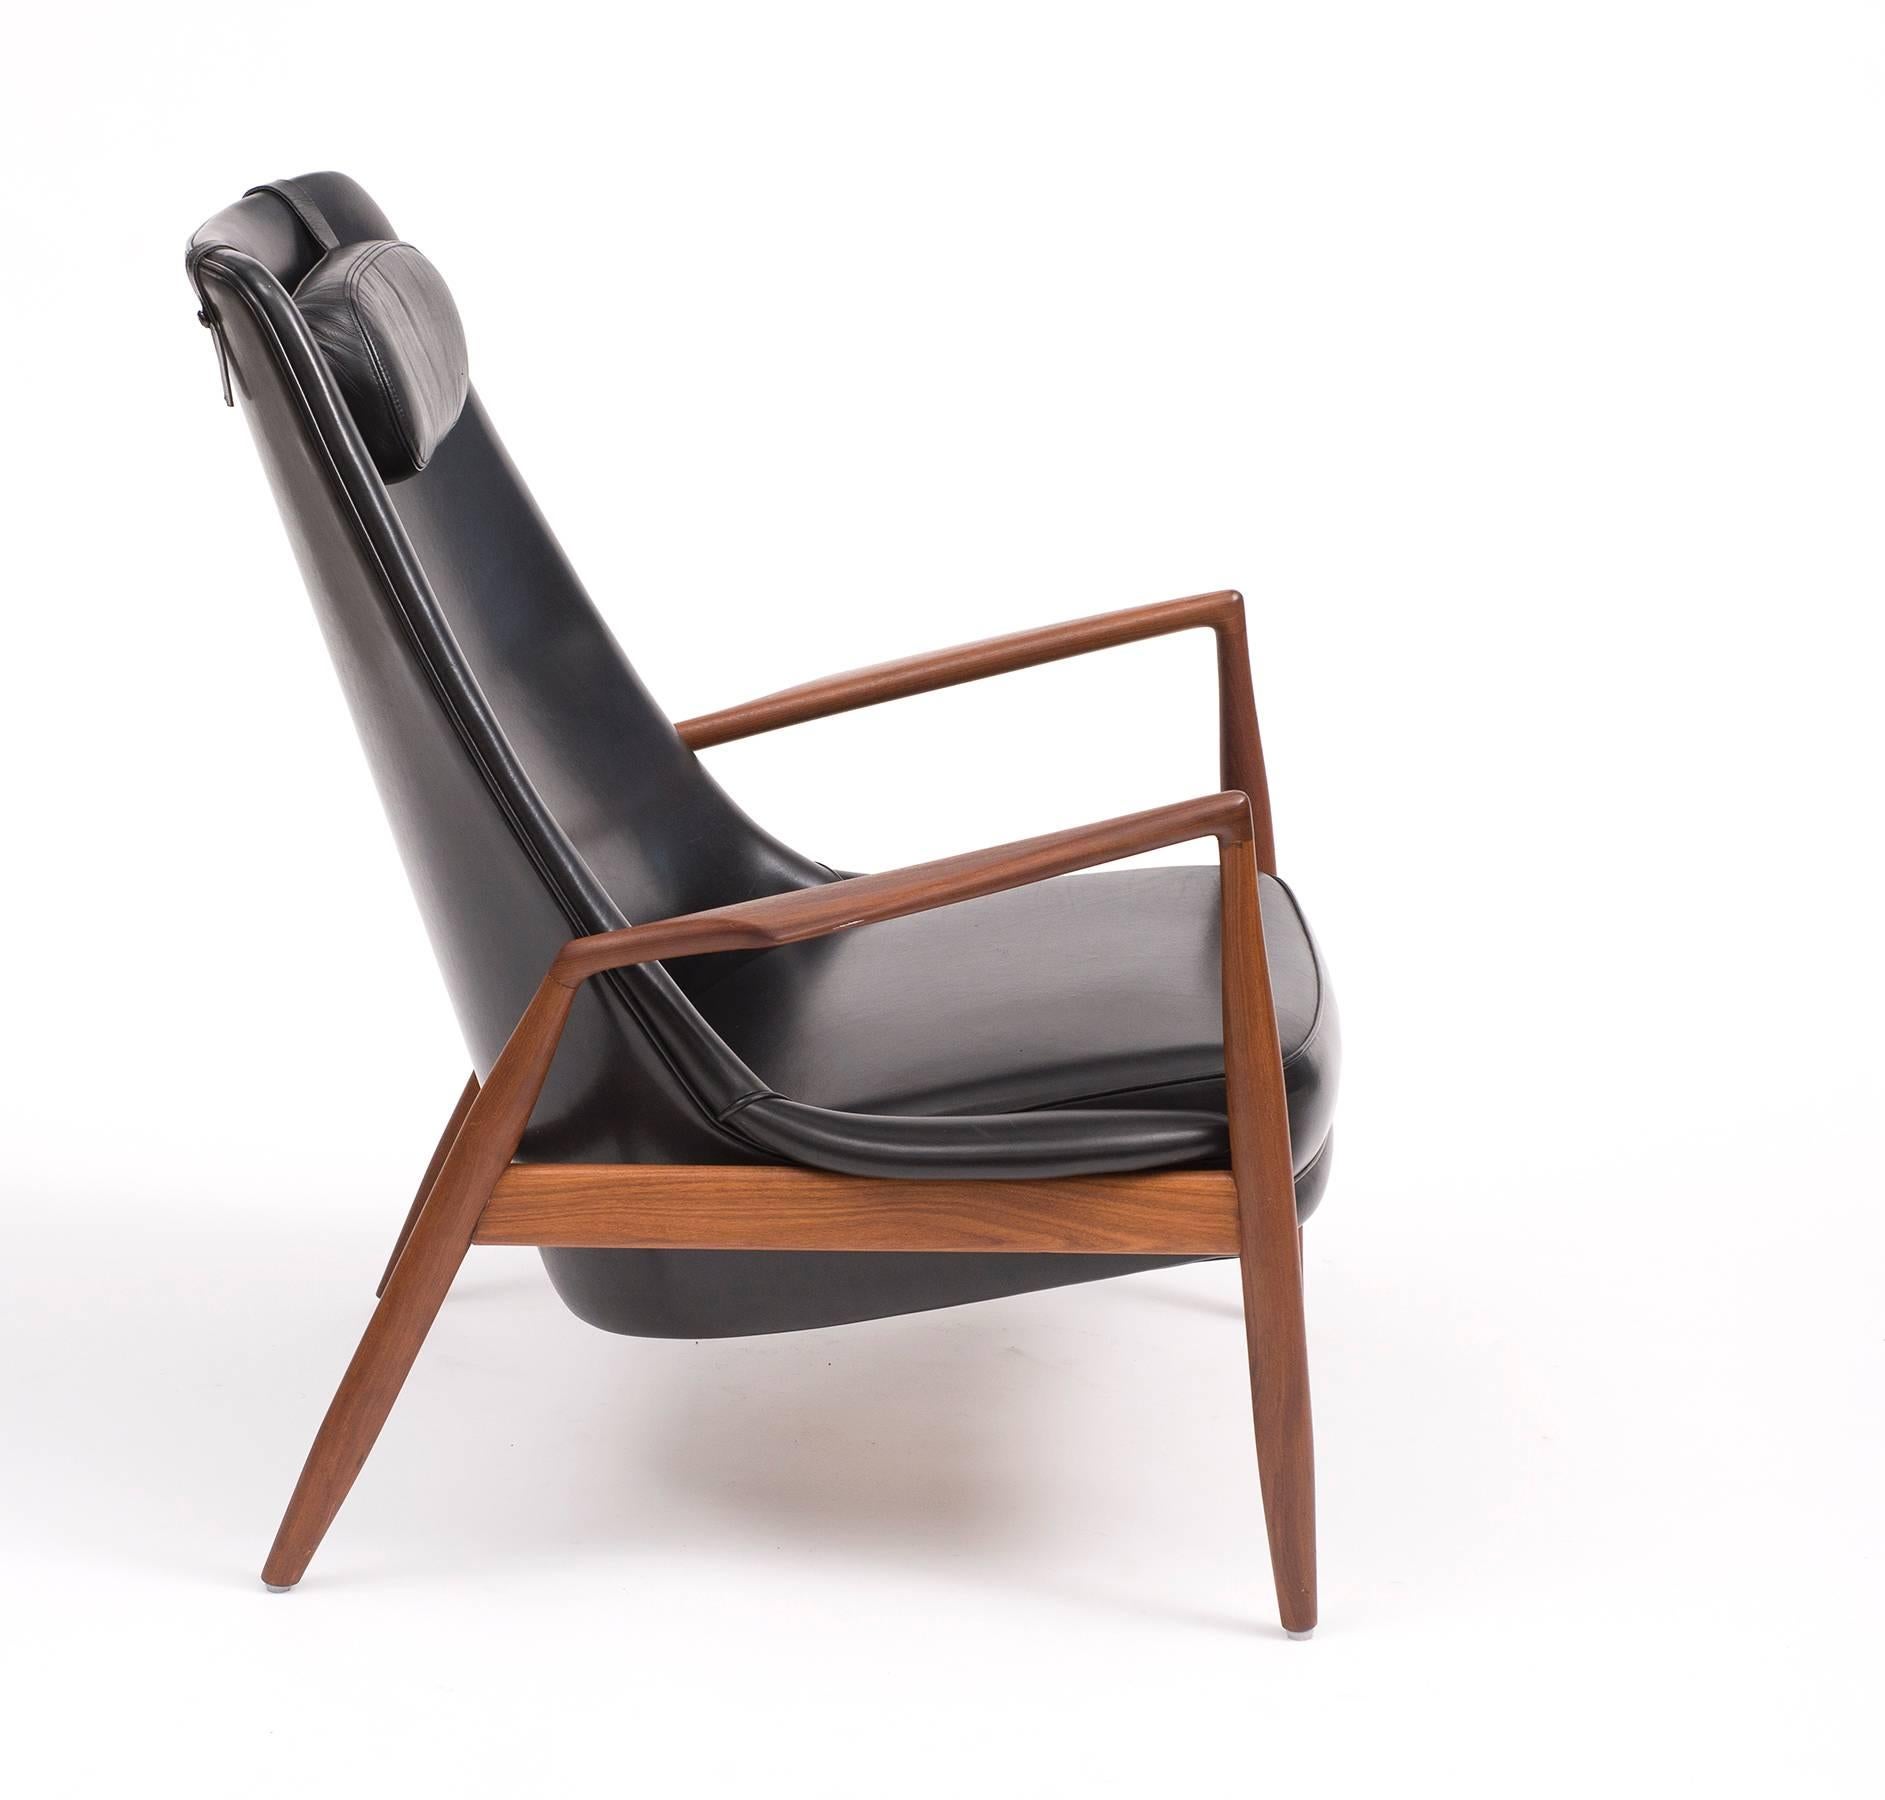 A fine example of the seal (Sålen) chair, model 800, in teak and black leather for OPE, Sweden, 1960s. High back version in excellent condition.

Retailed by Illums Bolighus, with retailer's metal plaque.